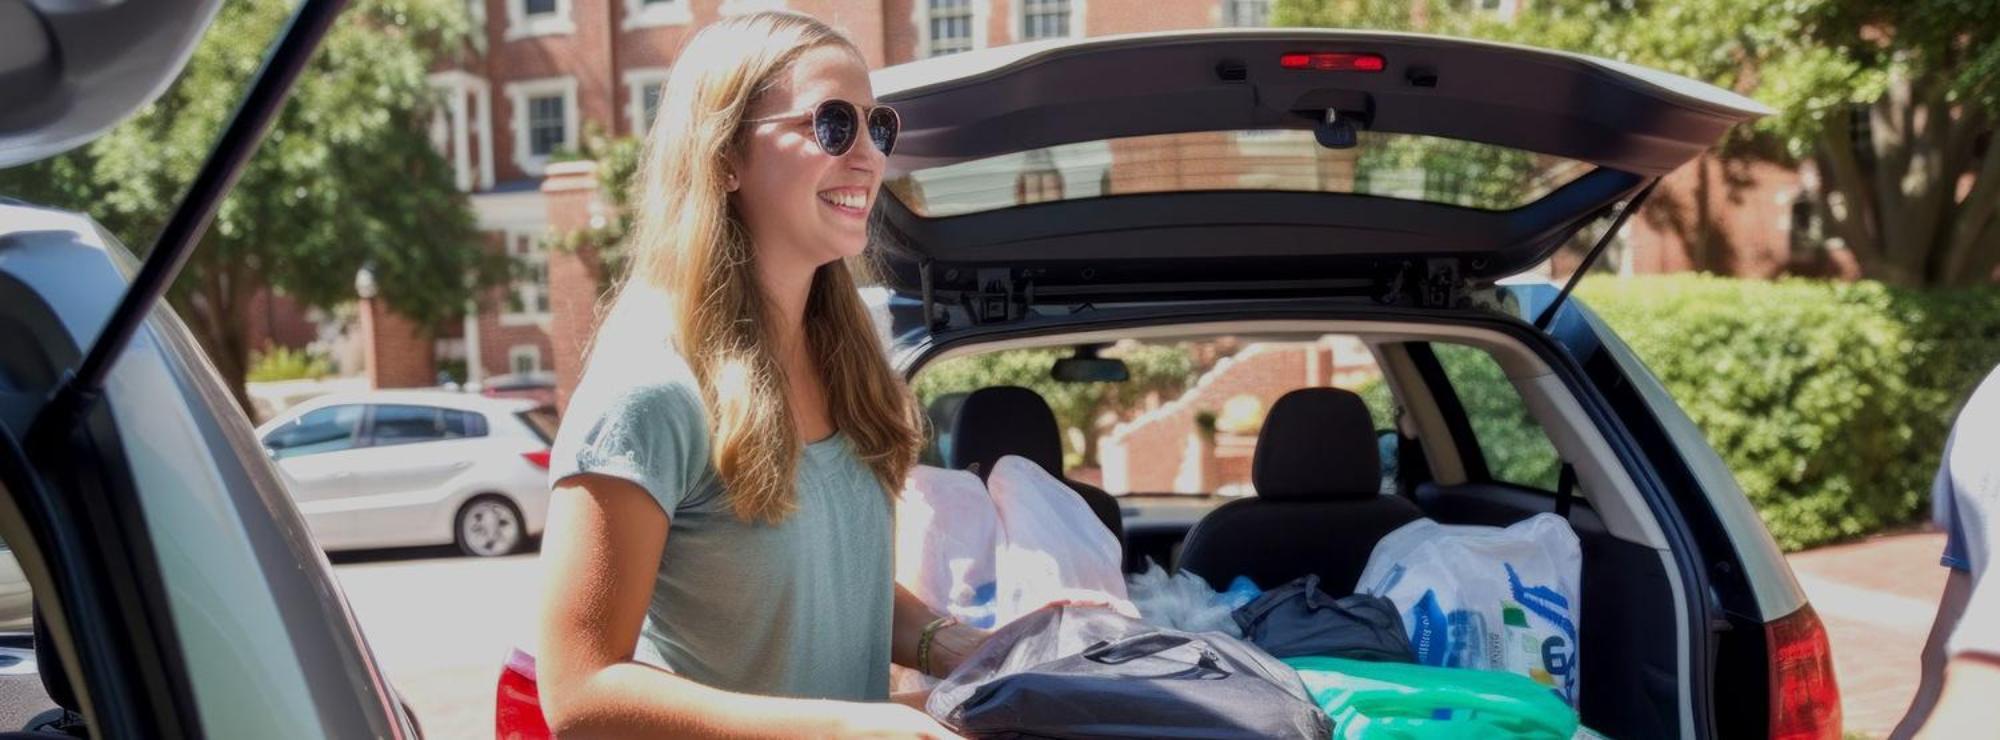 A female student unpacks her belongings from a car